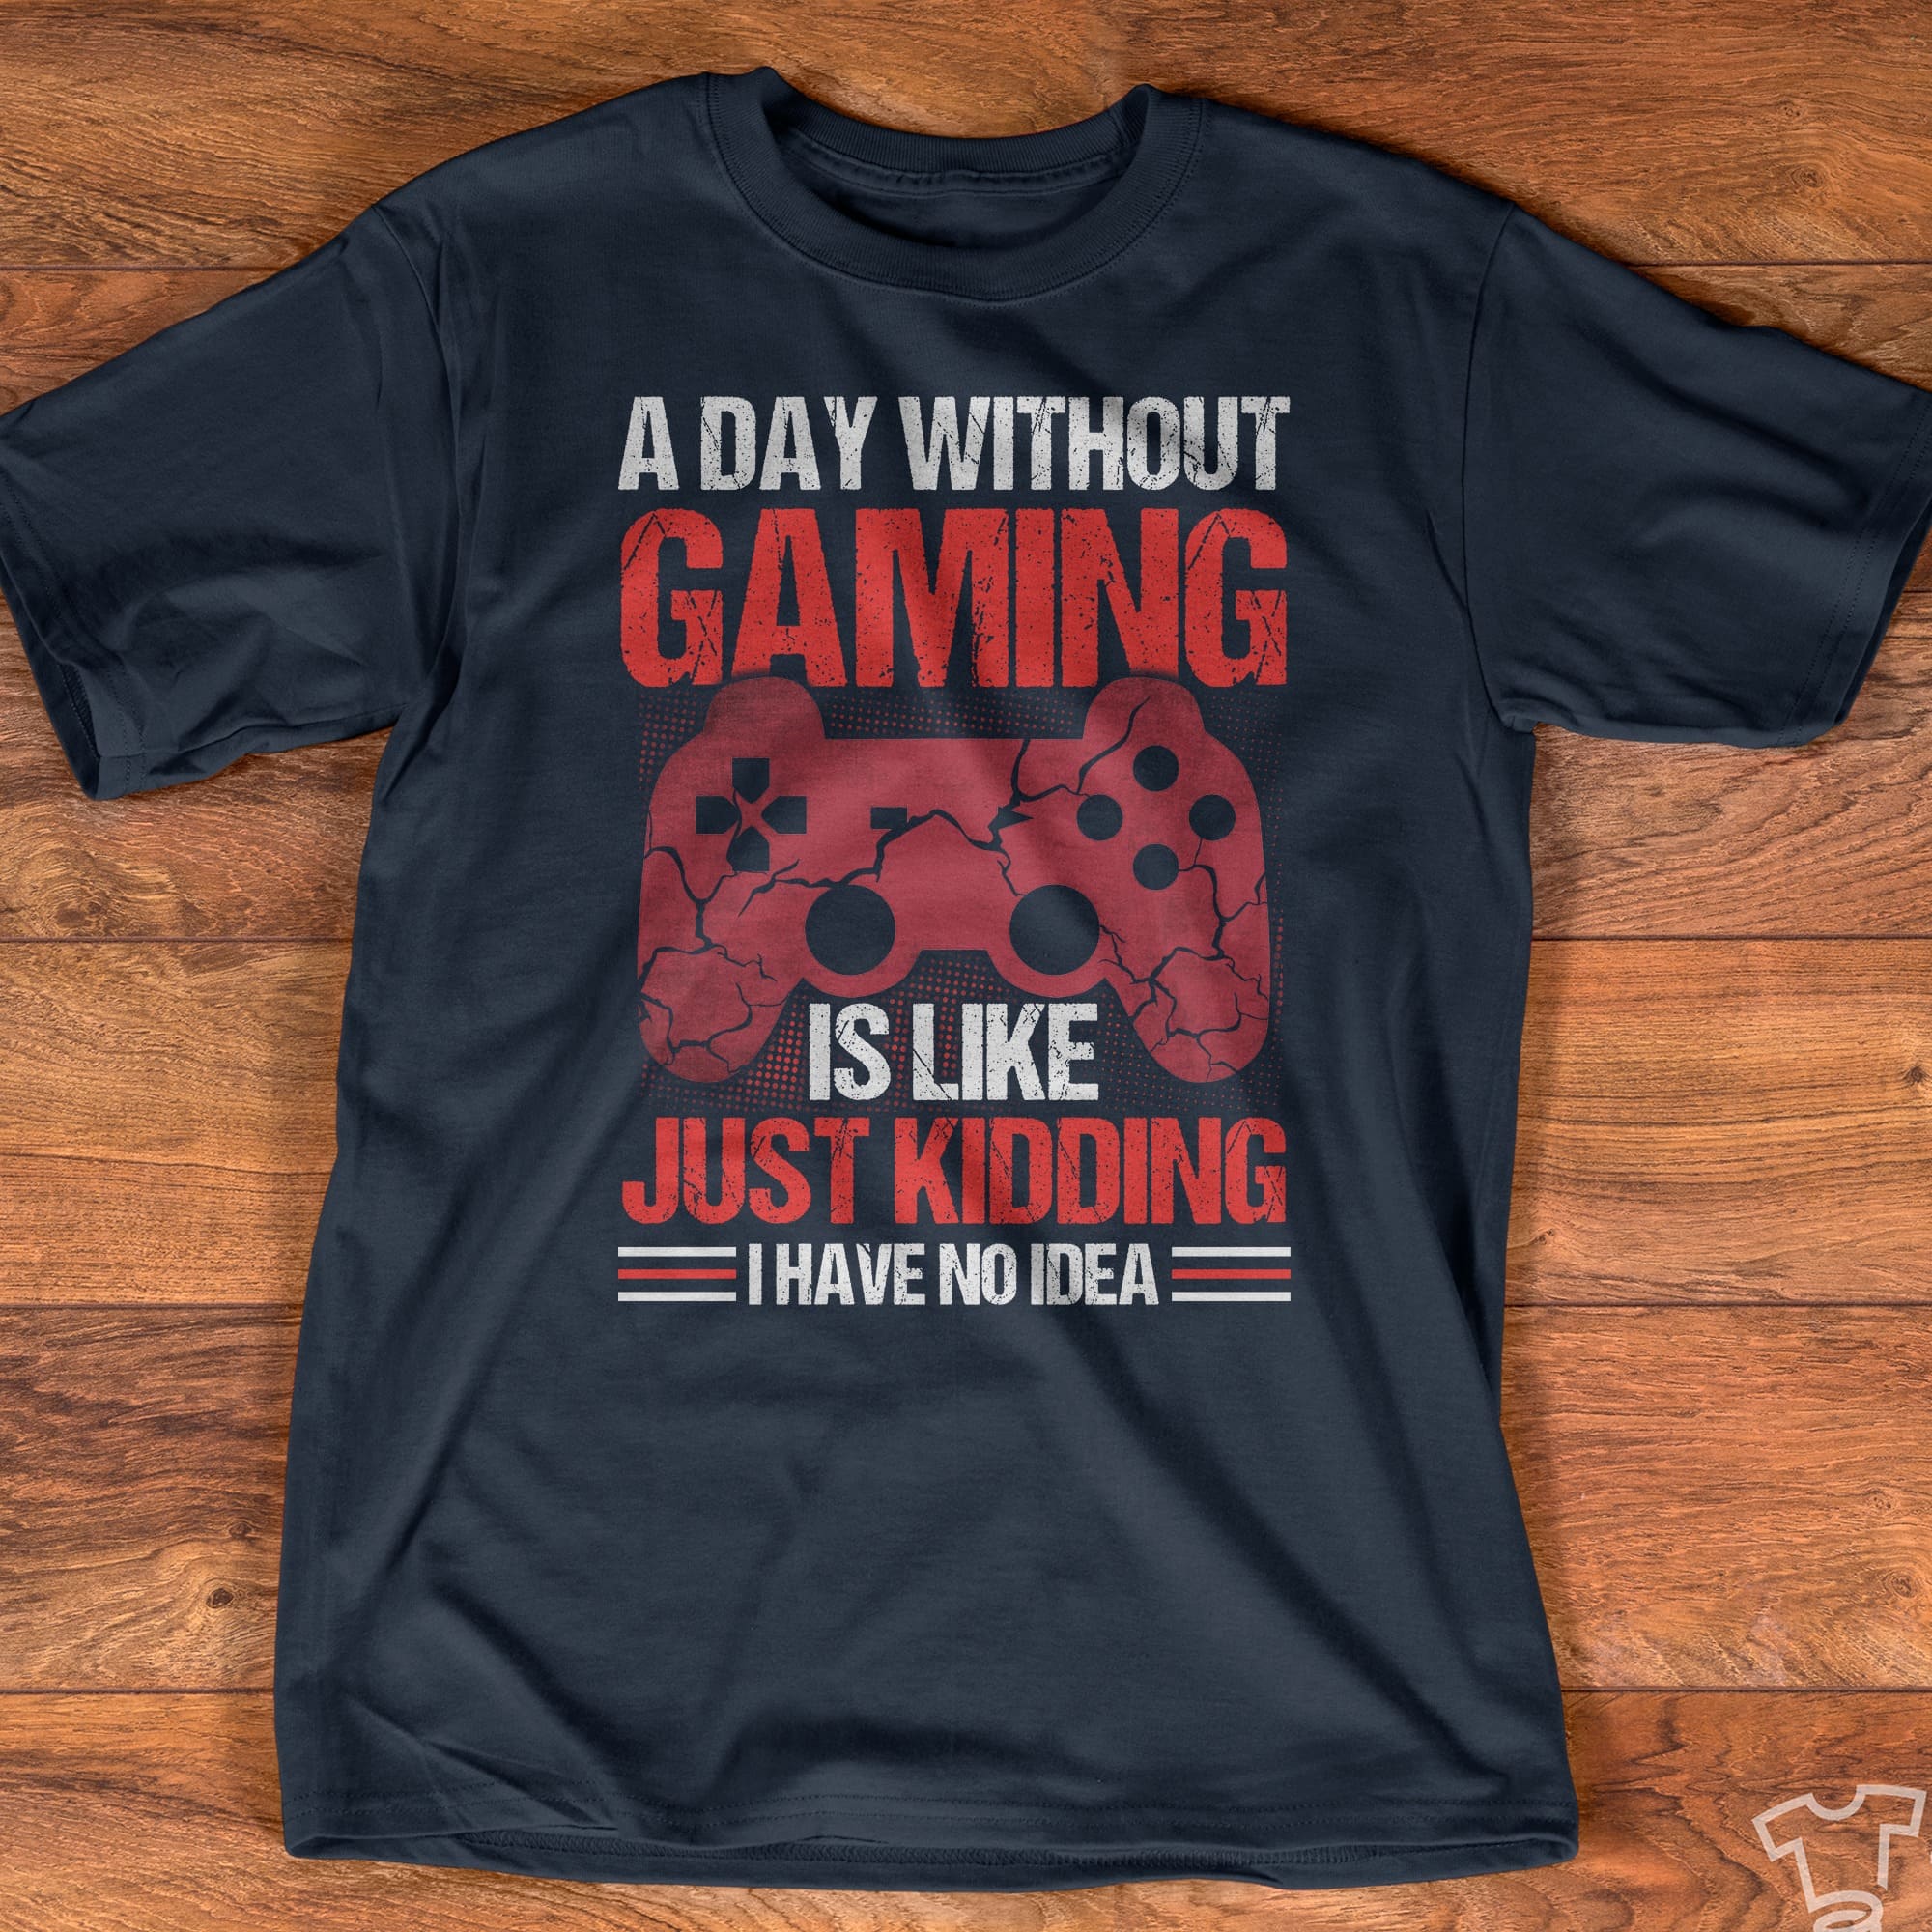 A day without gaming - Gift for gamer, gaming the hobby, love playing video game